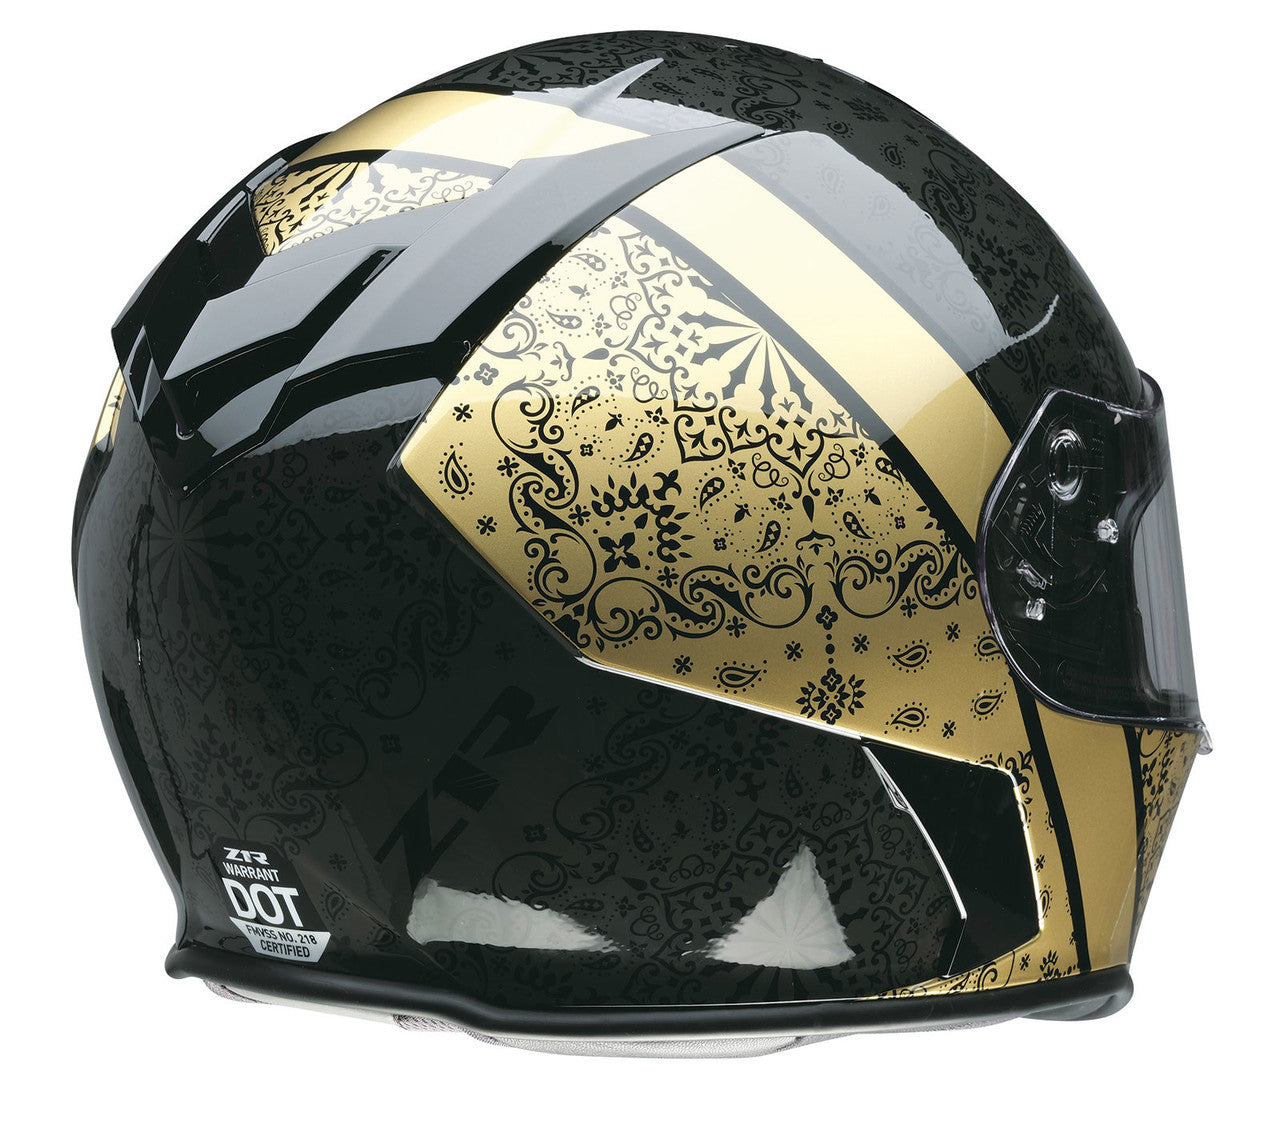 Z1R Warrant PAC Gold Full Face Helmet - Available In-Store Only